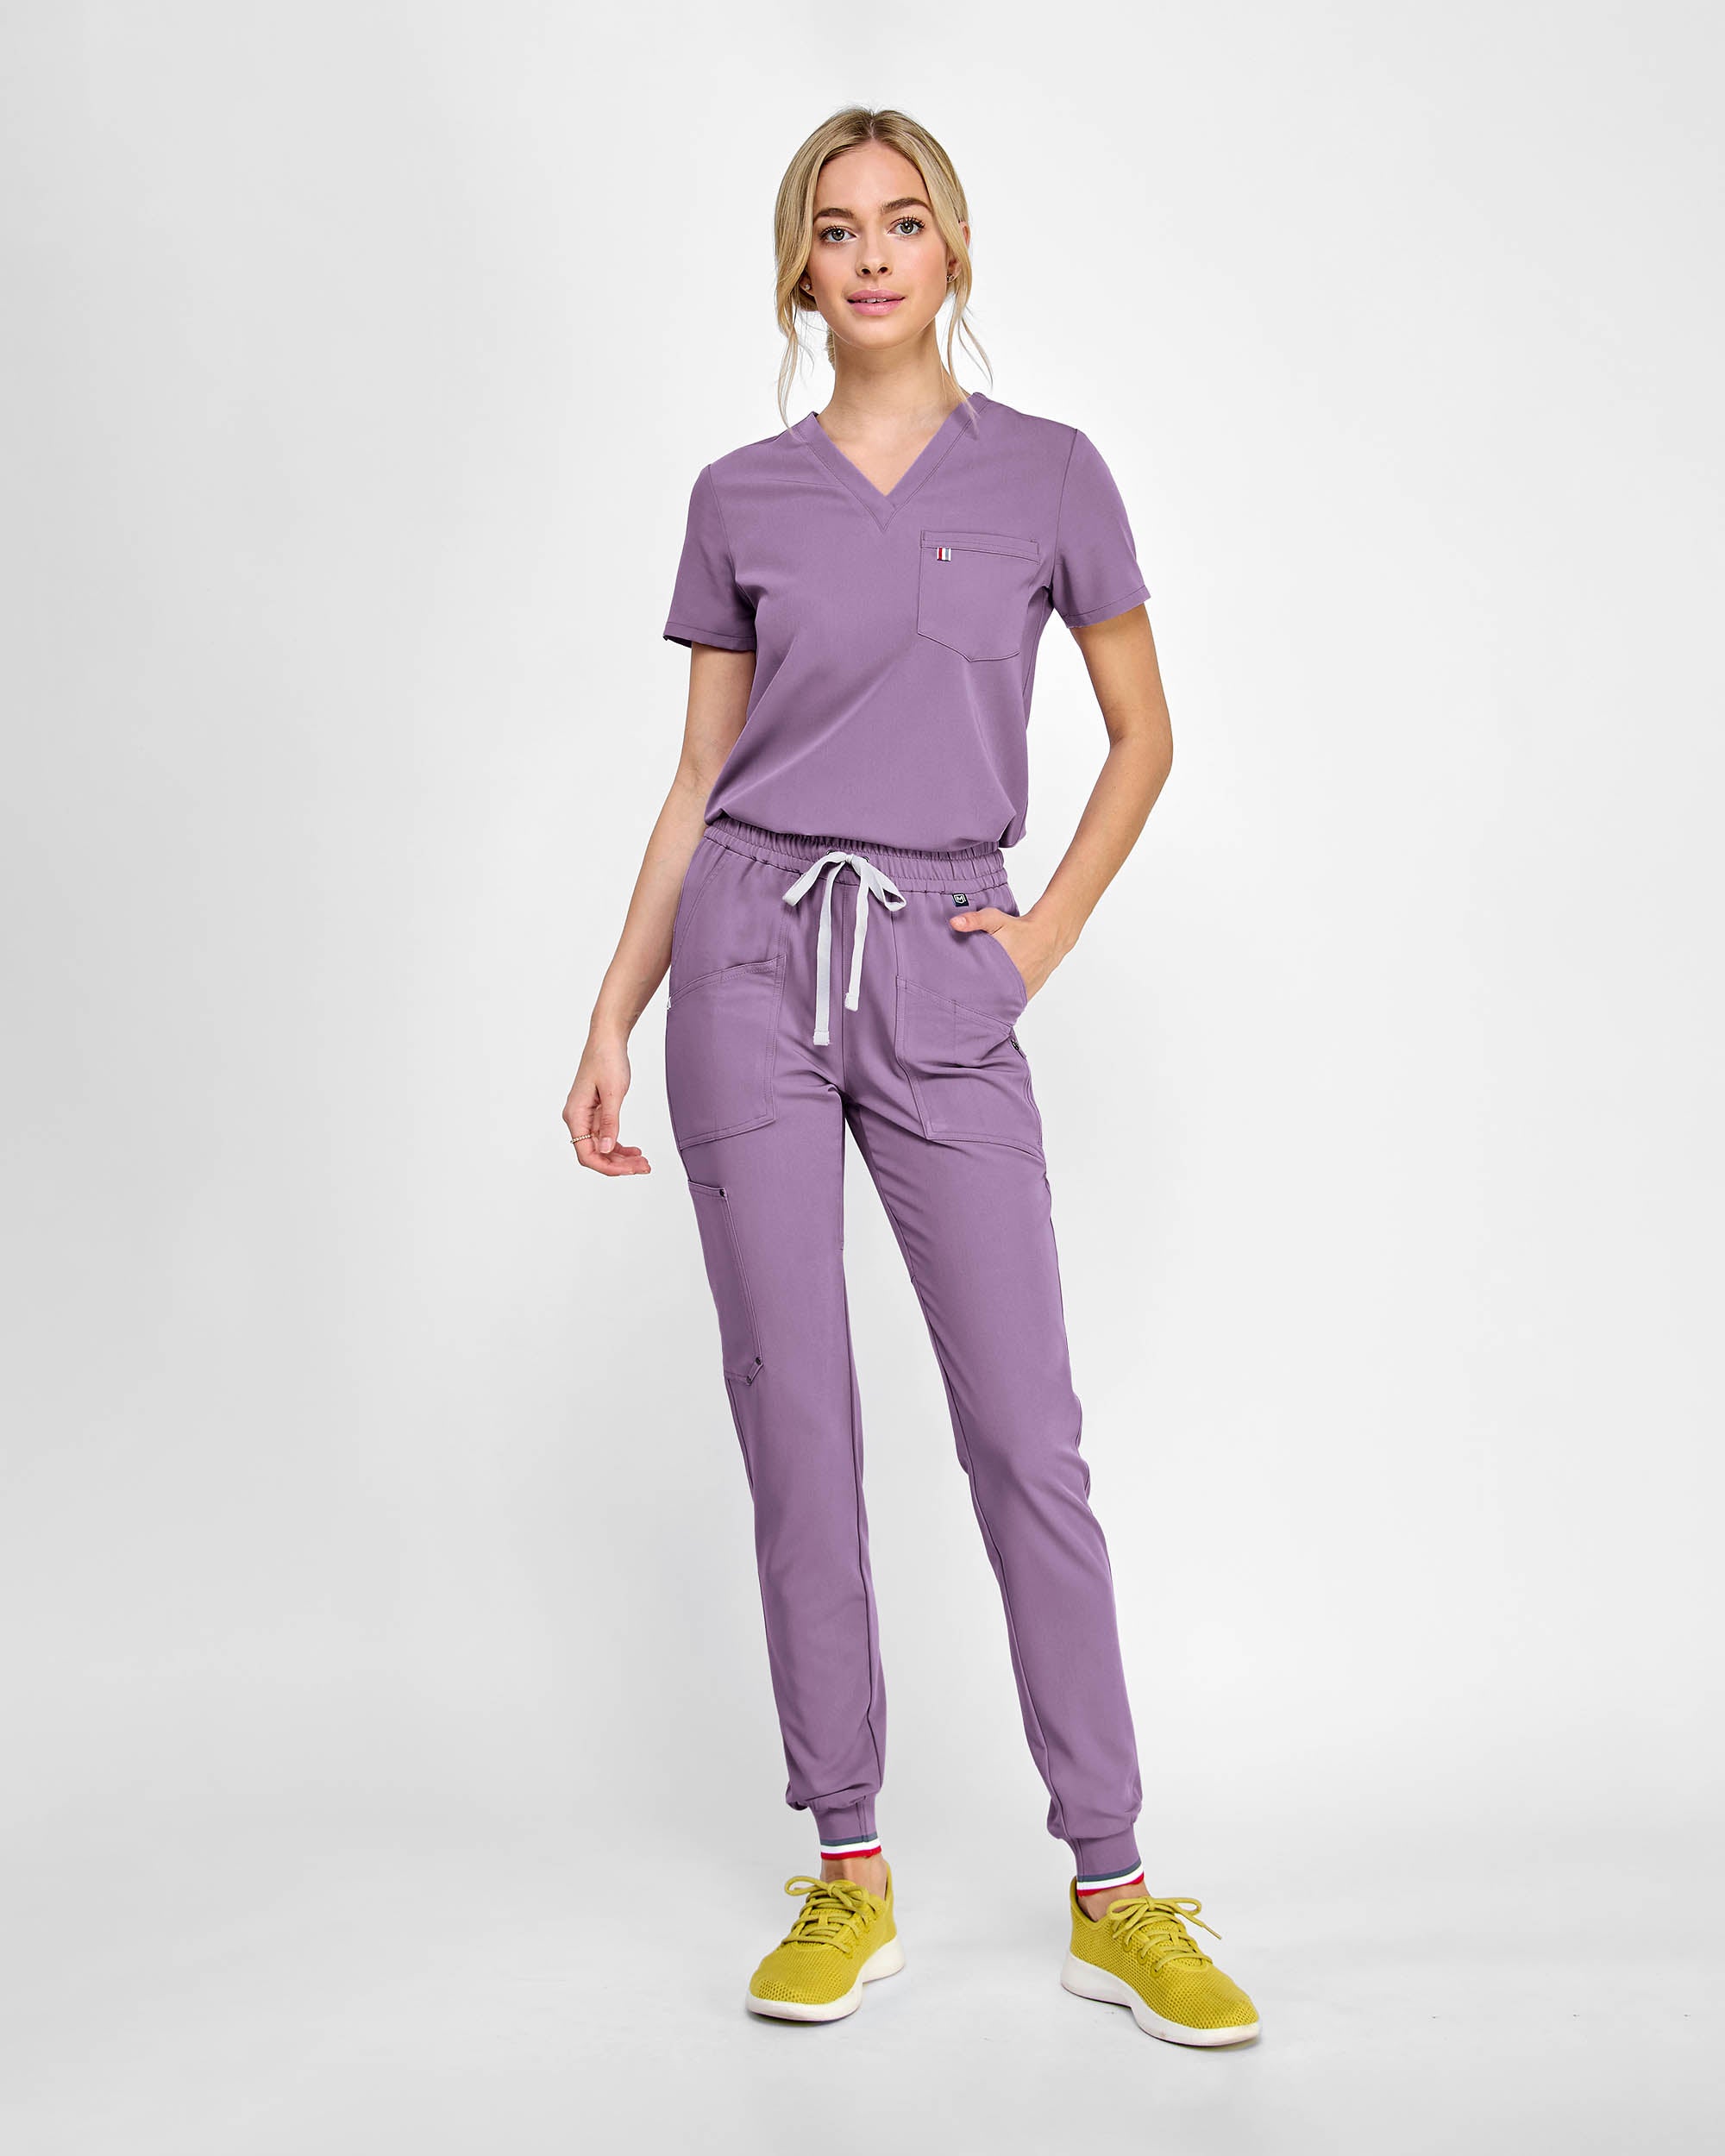 Women's Scrub Pants: Sustainable & Recycled Material Scrubs for Women